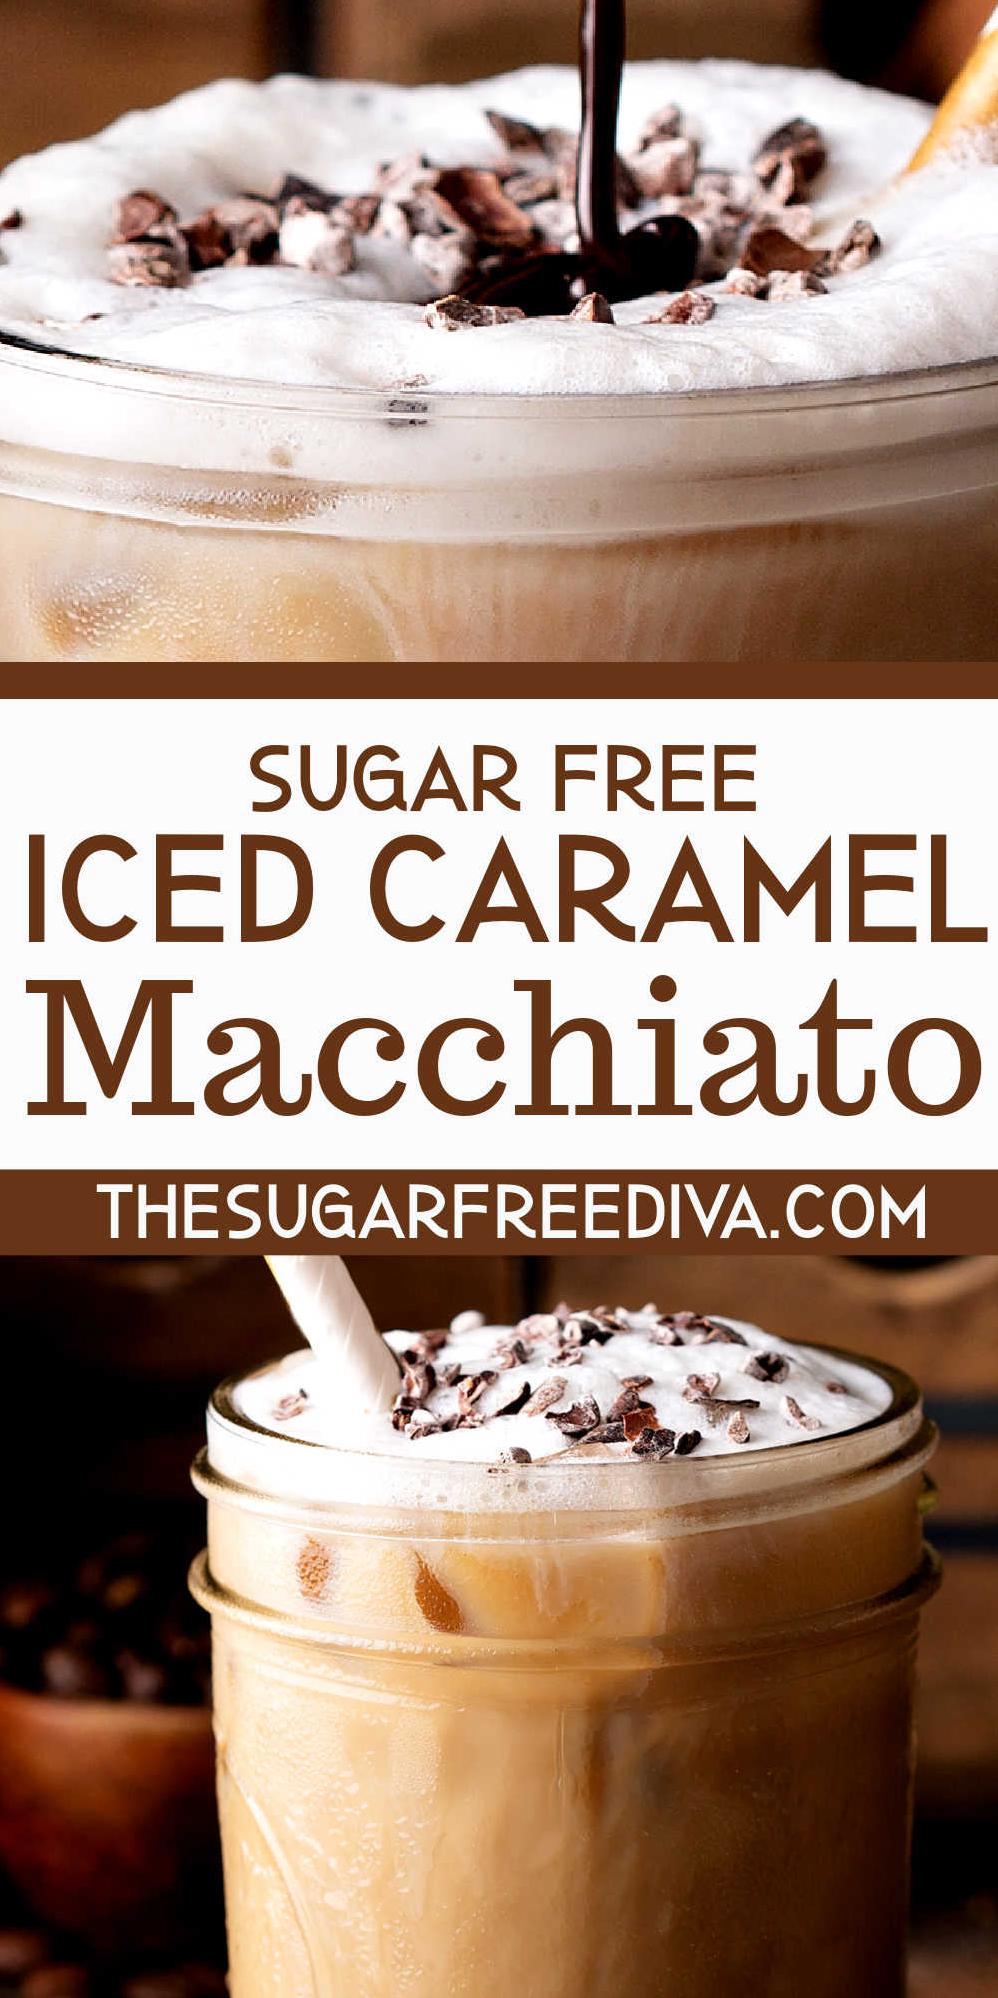  Get ready to have your taste buds delighted with the perfect sugar-free iced mocha.